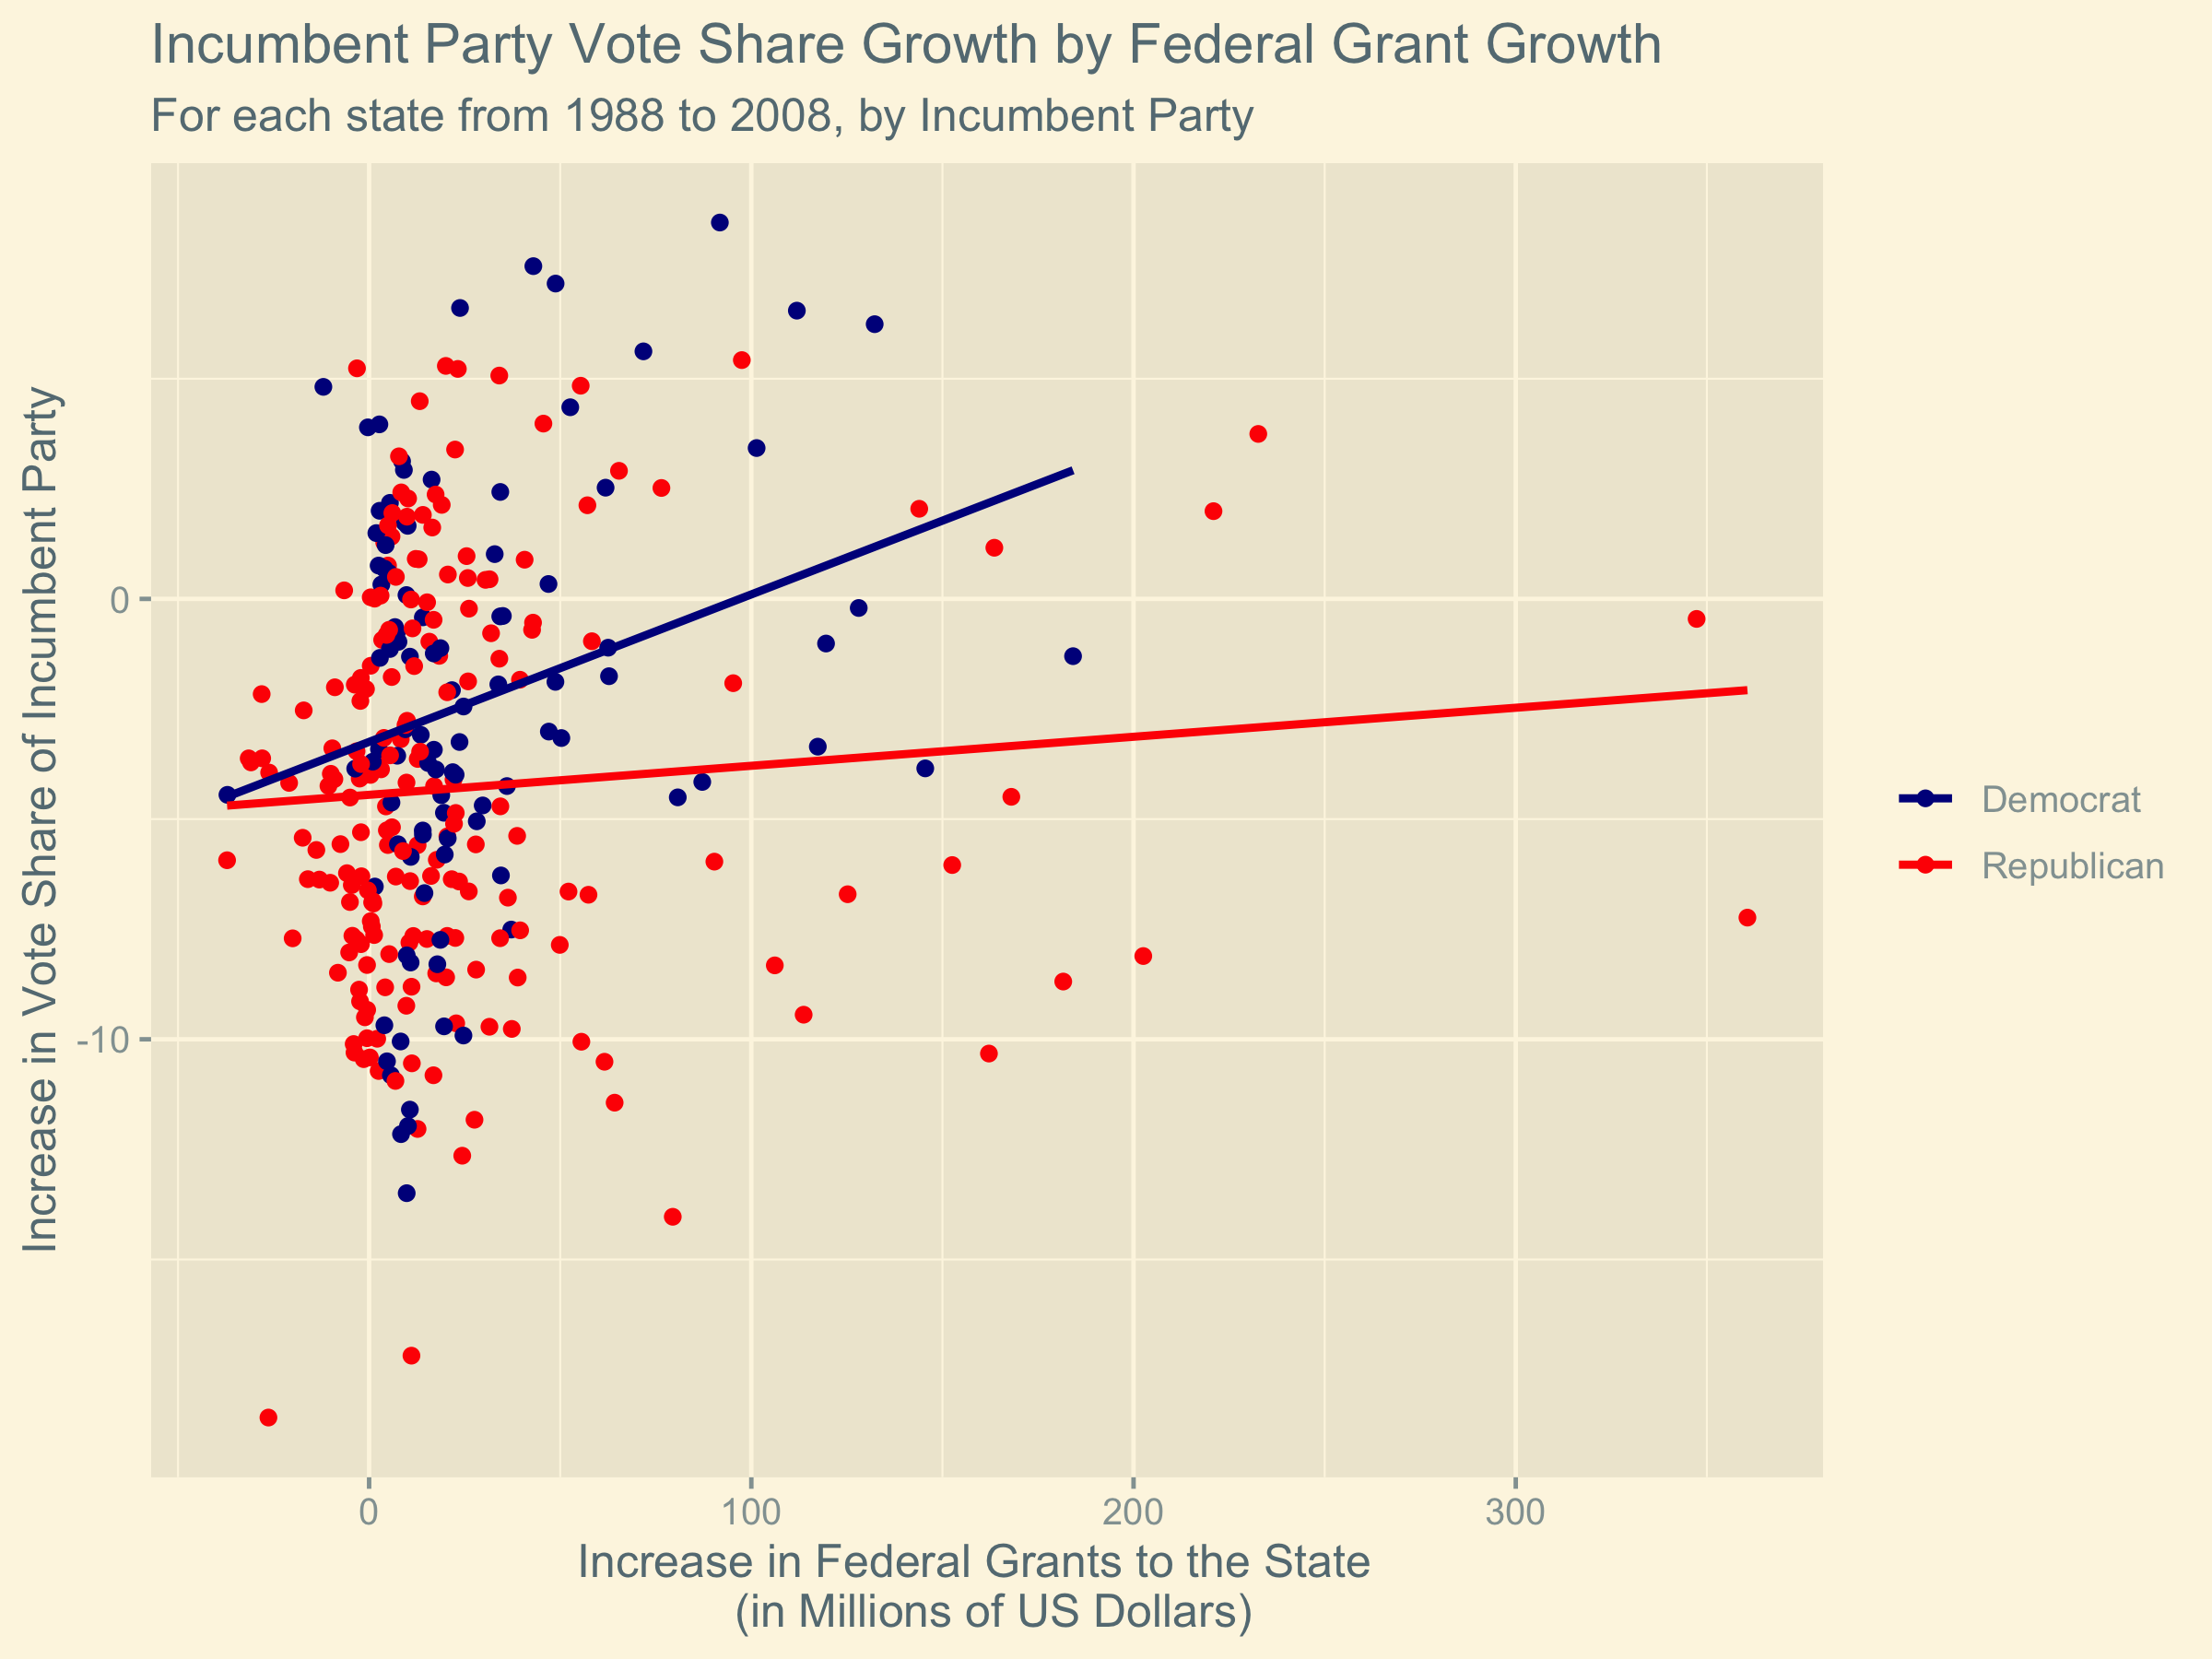 image of grants vs votes by incumbent party